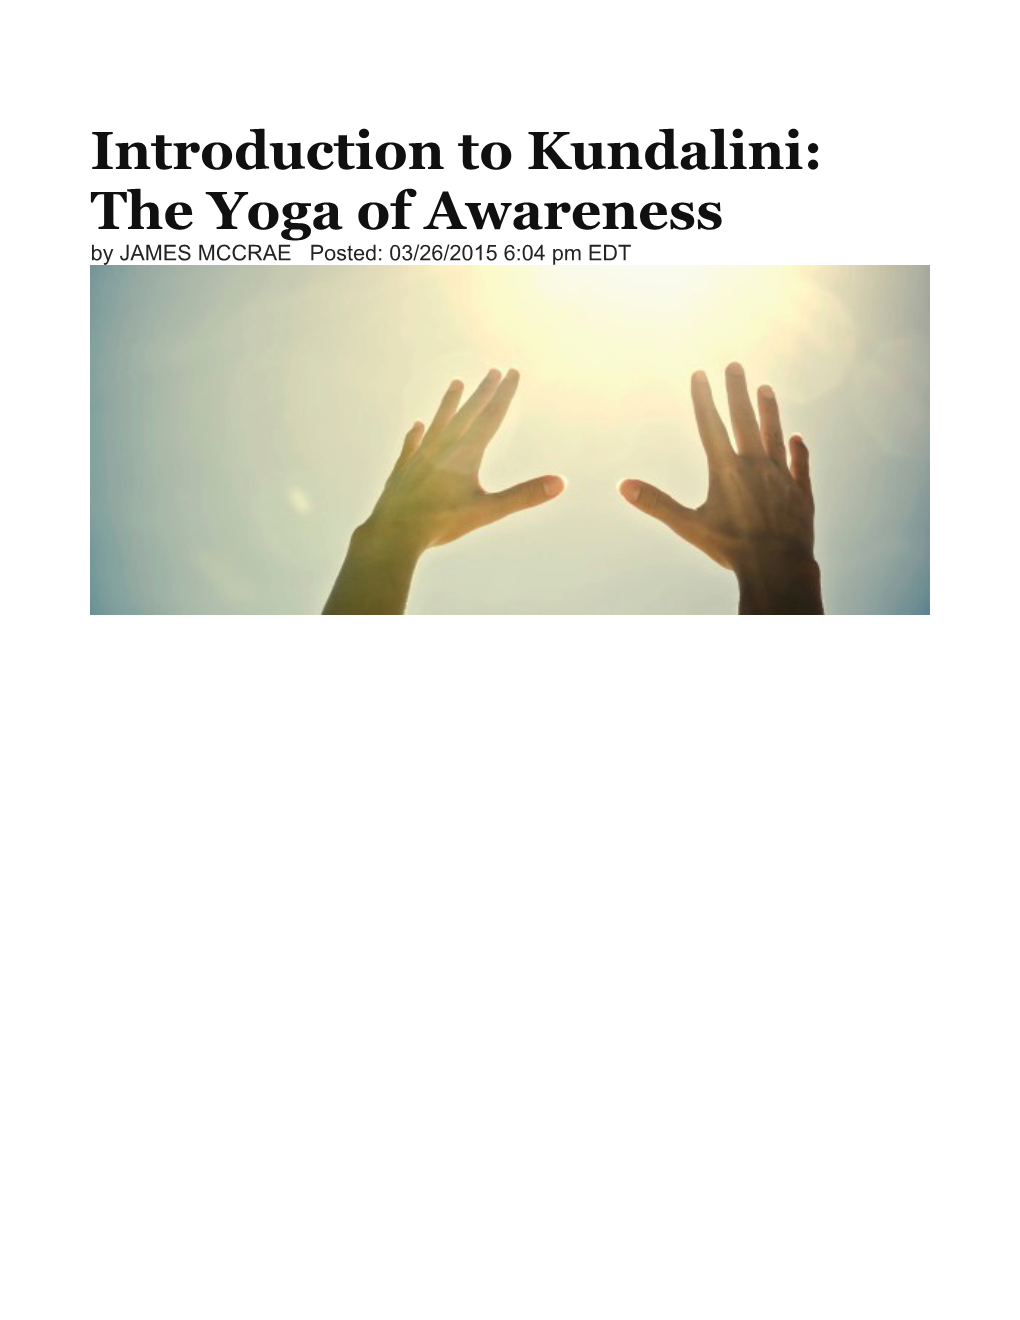 Intro to Kundalini Yoga Article.Pages